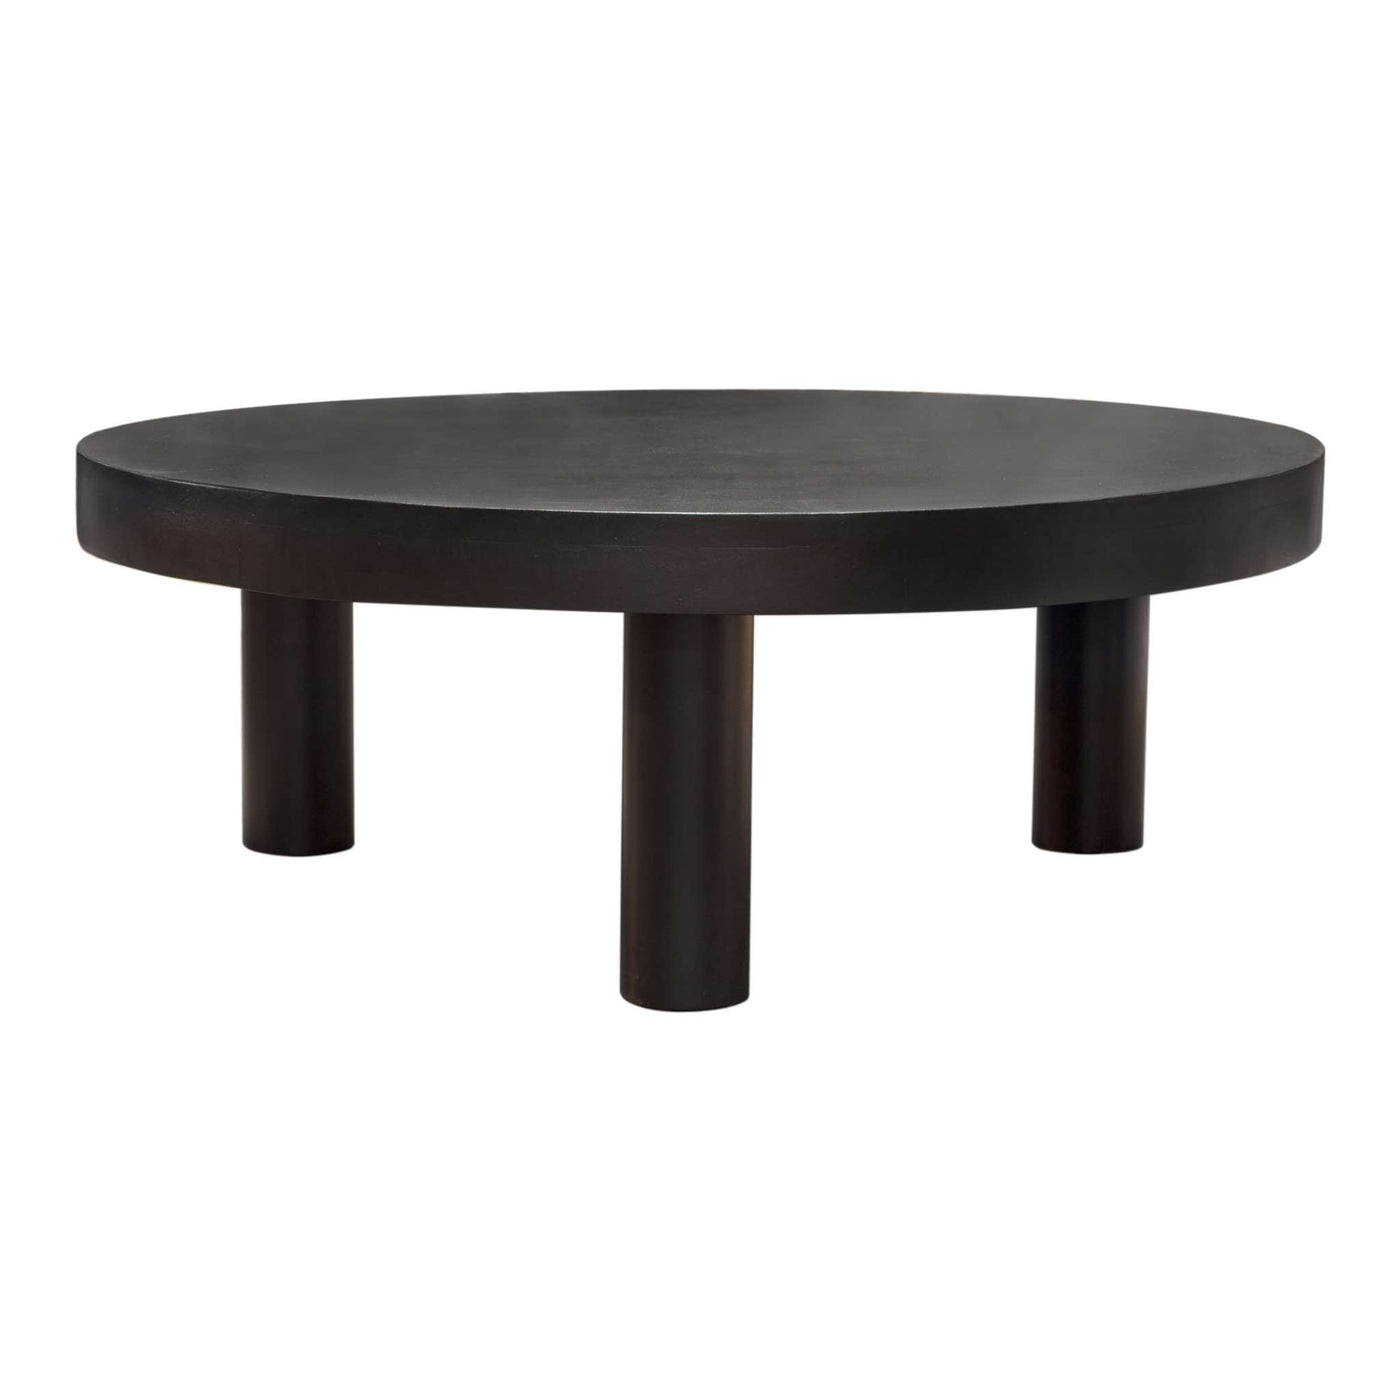 Rune Accent Table w/ Solid Acacia Wood Top & Iron Leg Base in Black Finish by Diamond Sofa